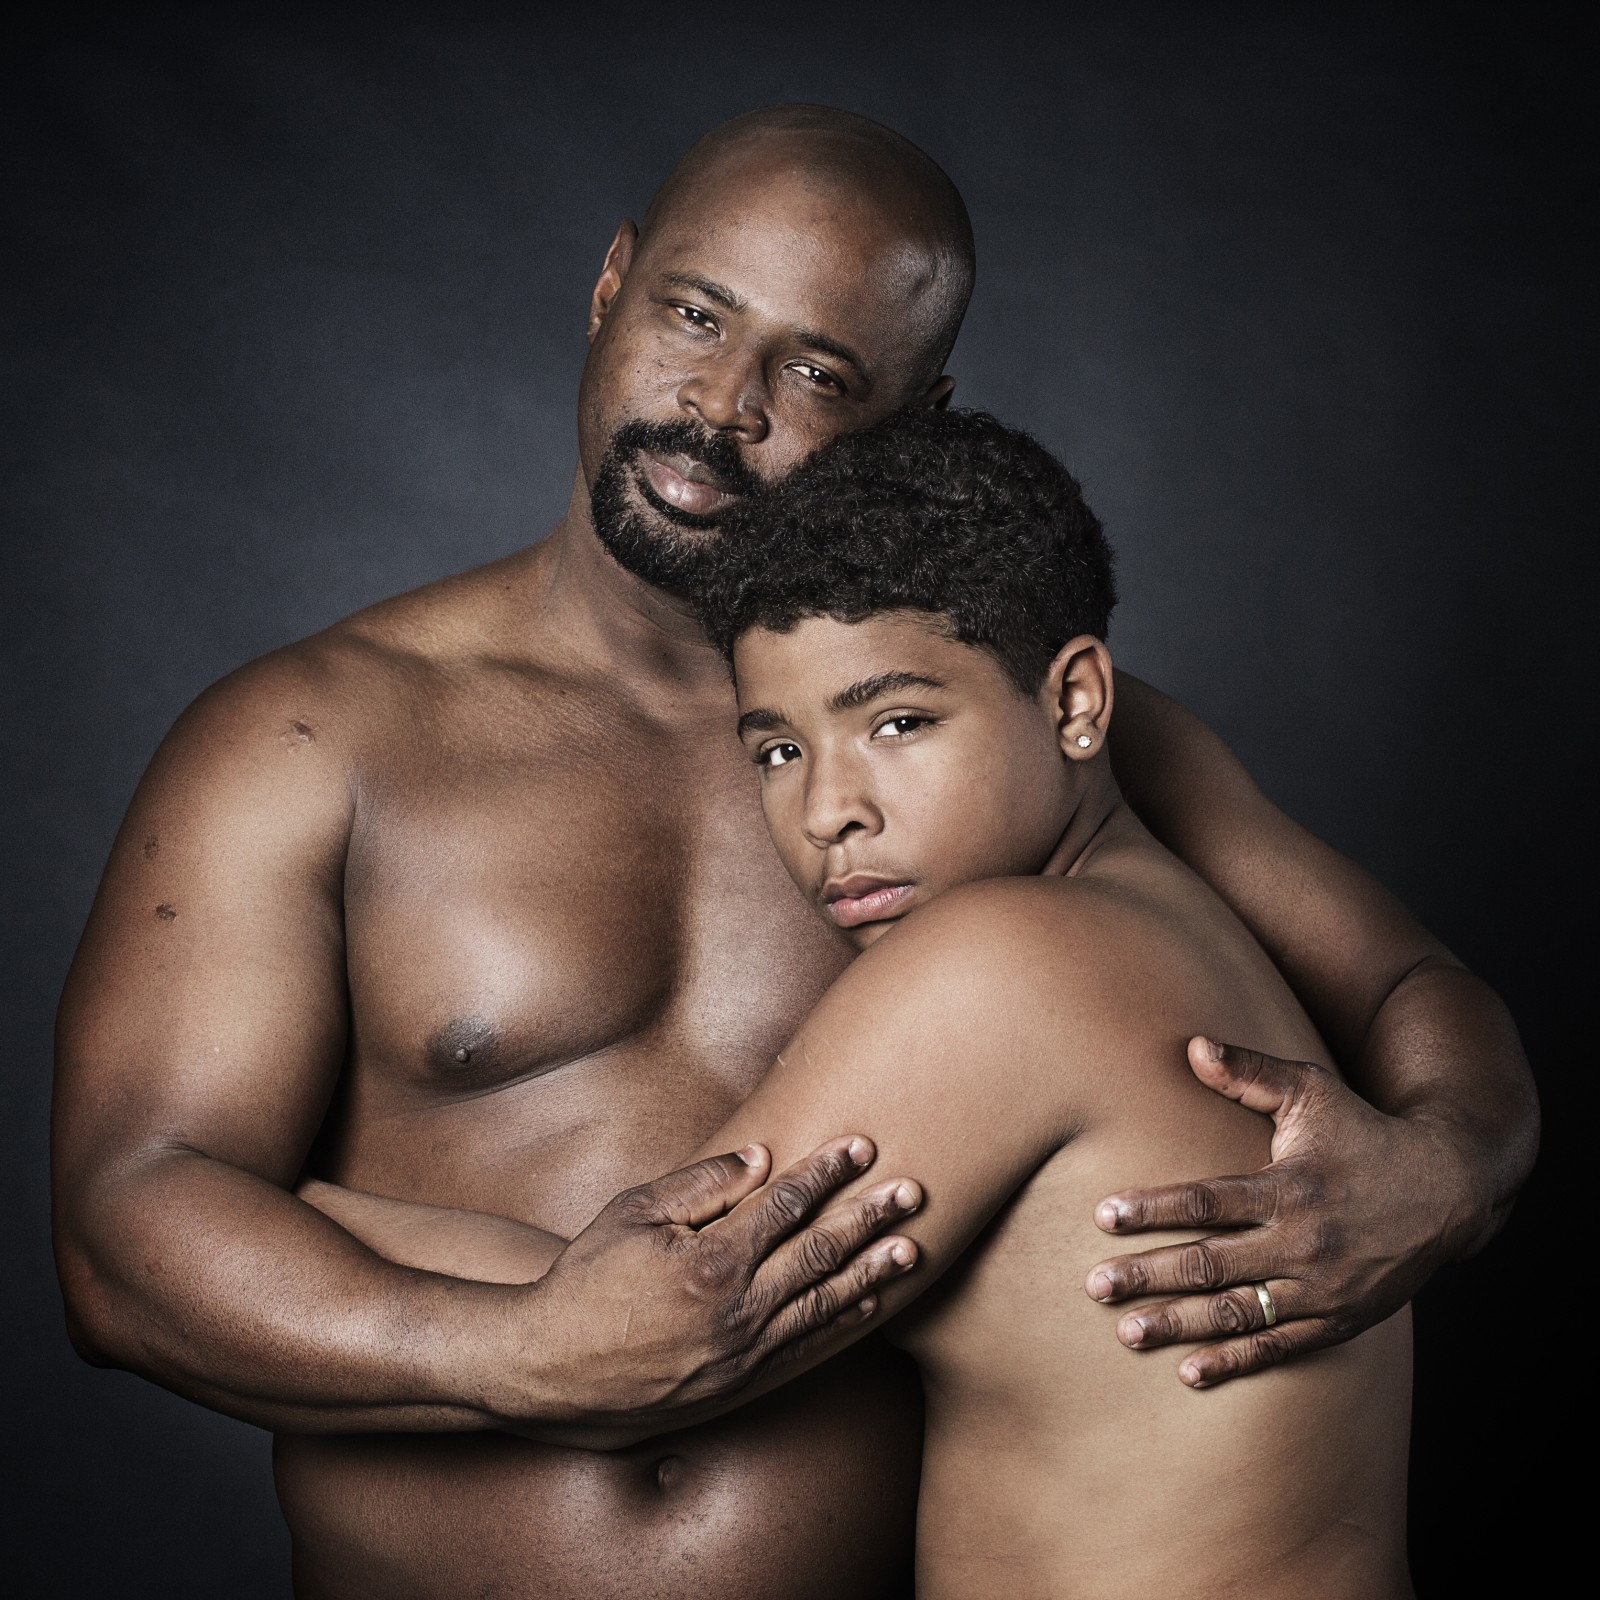 celeste bradford recommends Father Son Nude Pictures